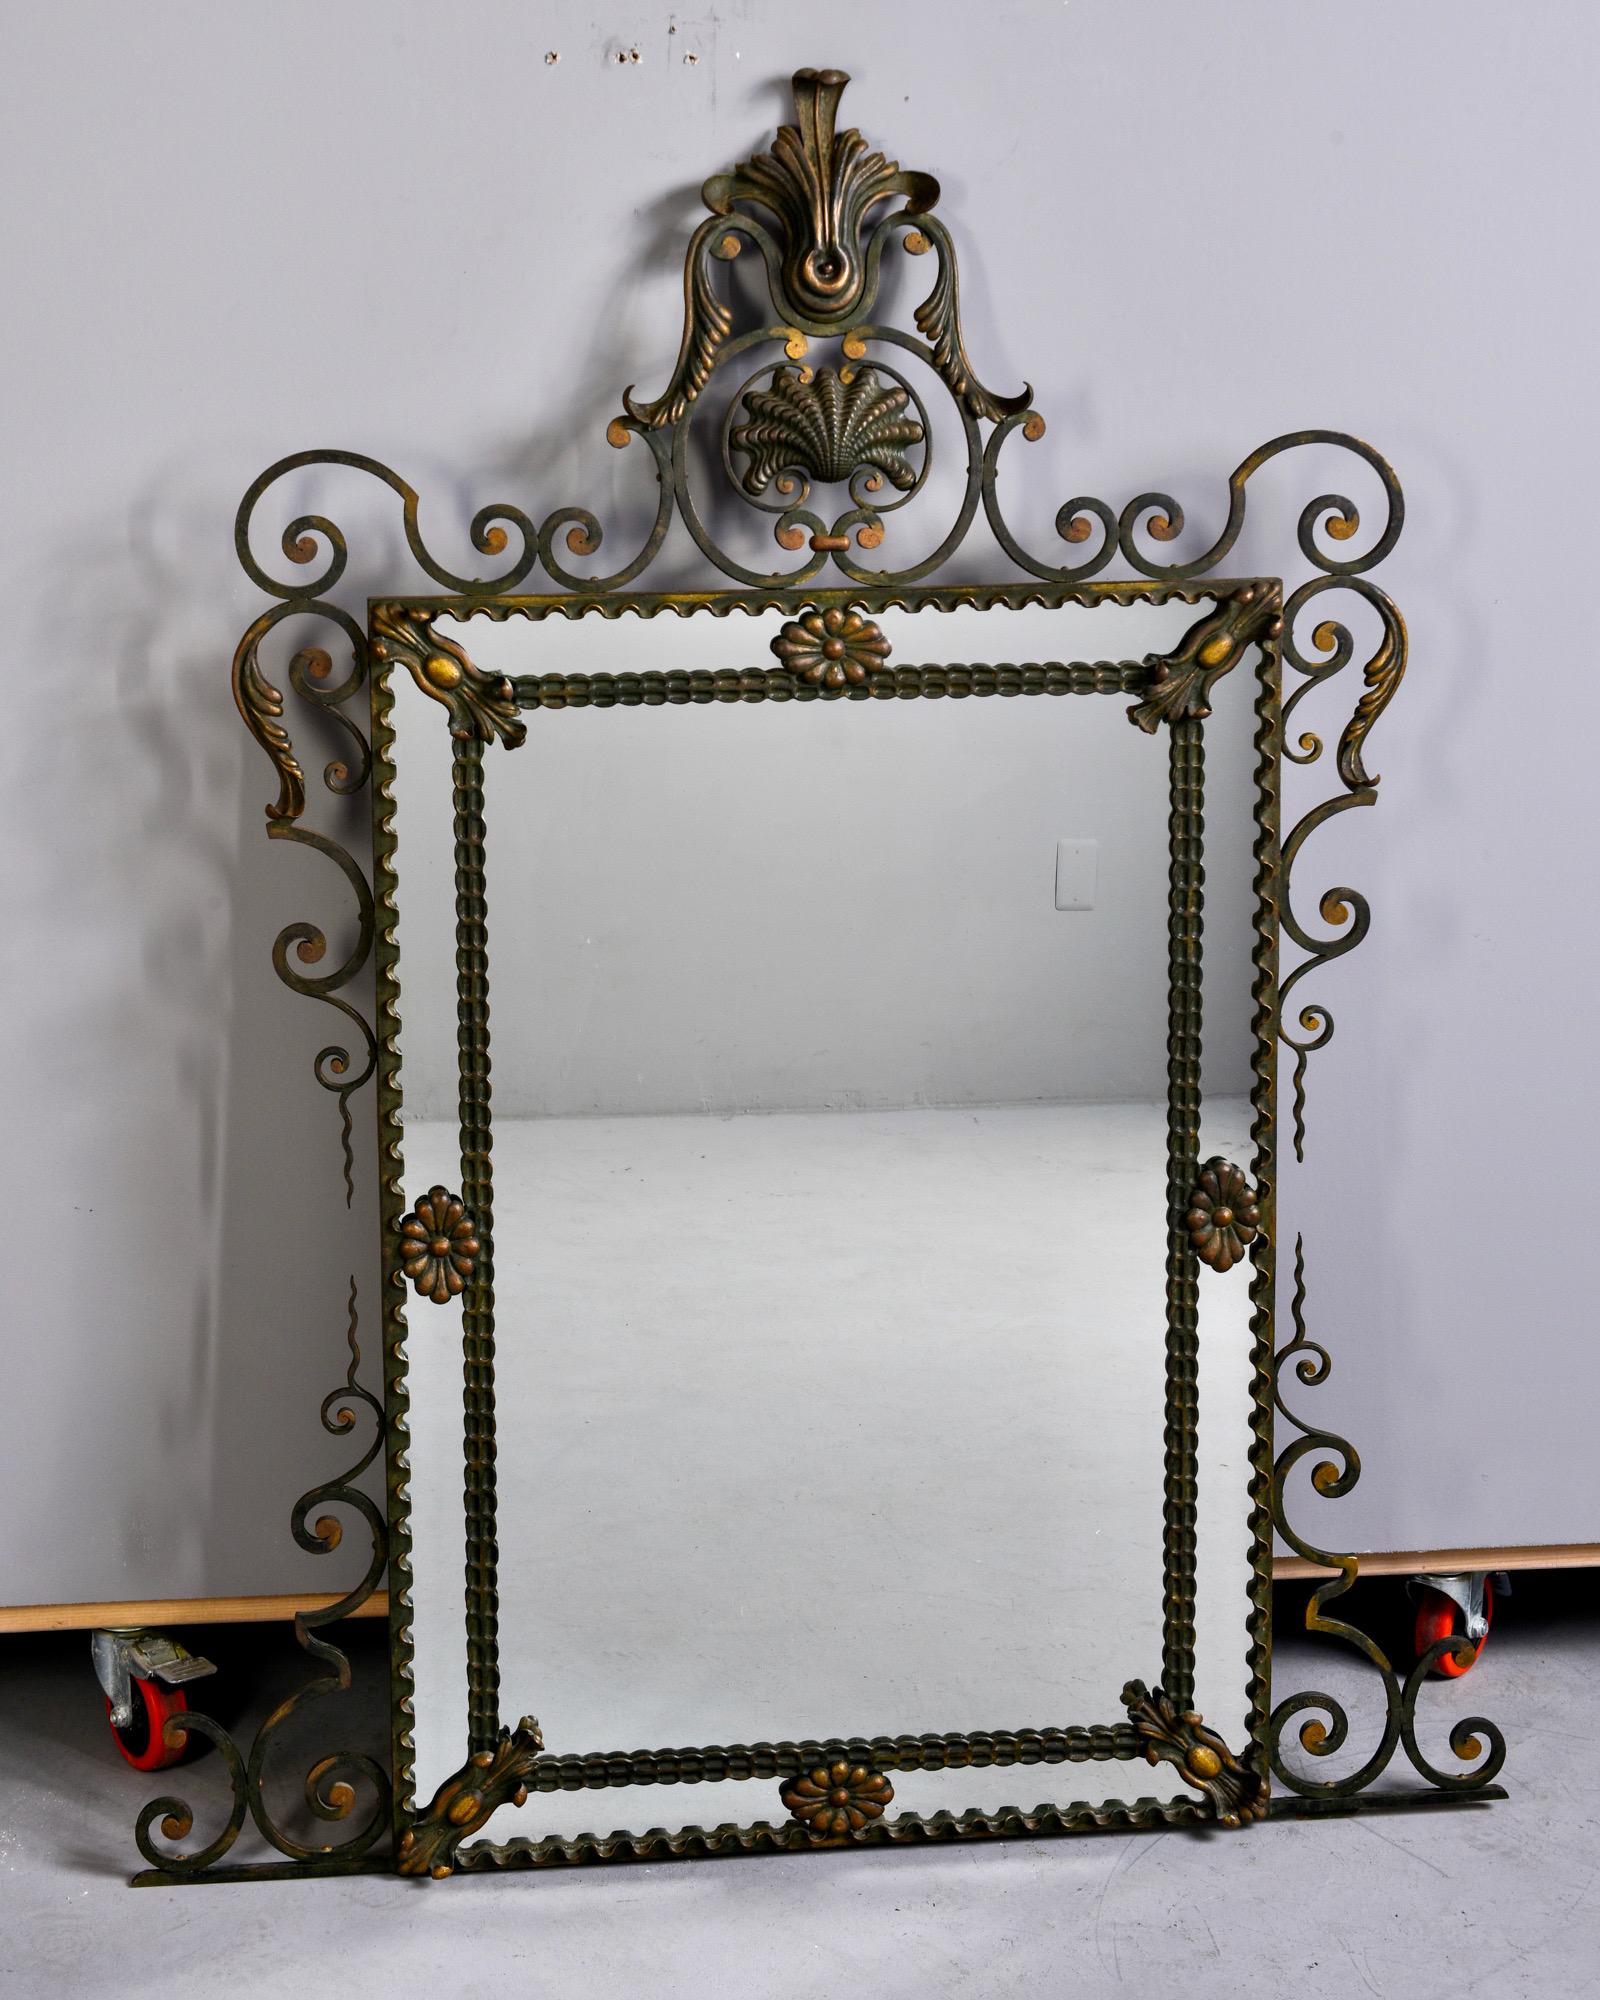 Found in France, this circa 1900s mirror features a fancy iron frame with tall crest and scrolled details at corners. Original green painted finish with gilded details. Marked by maker, Clavell on lower right hand side of frame. 

Very good